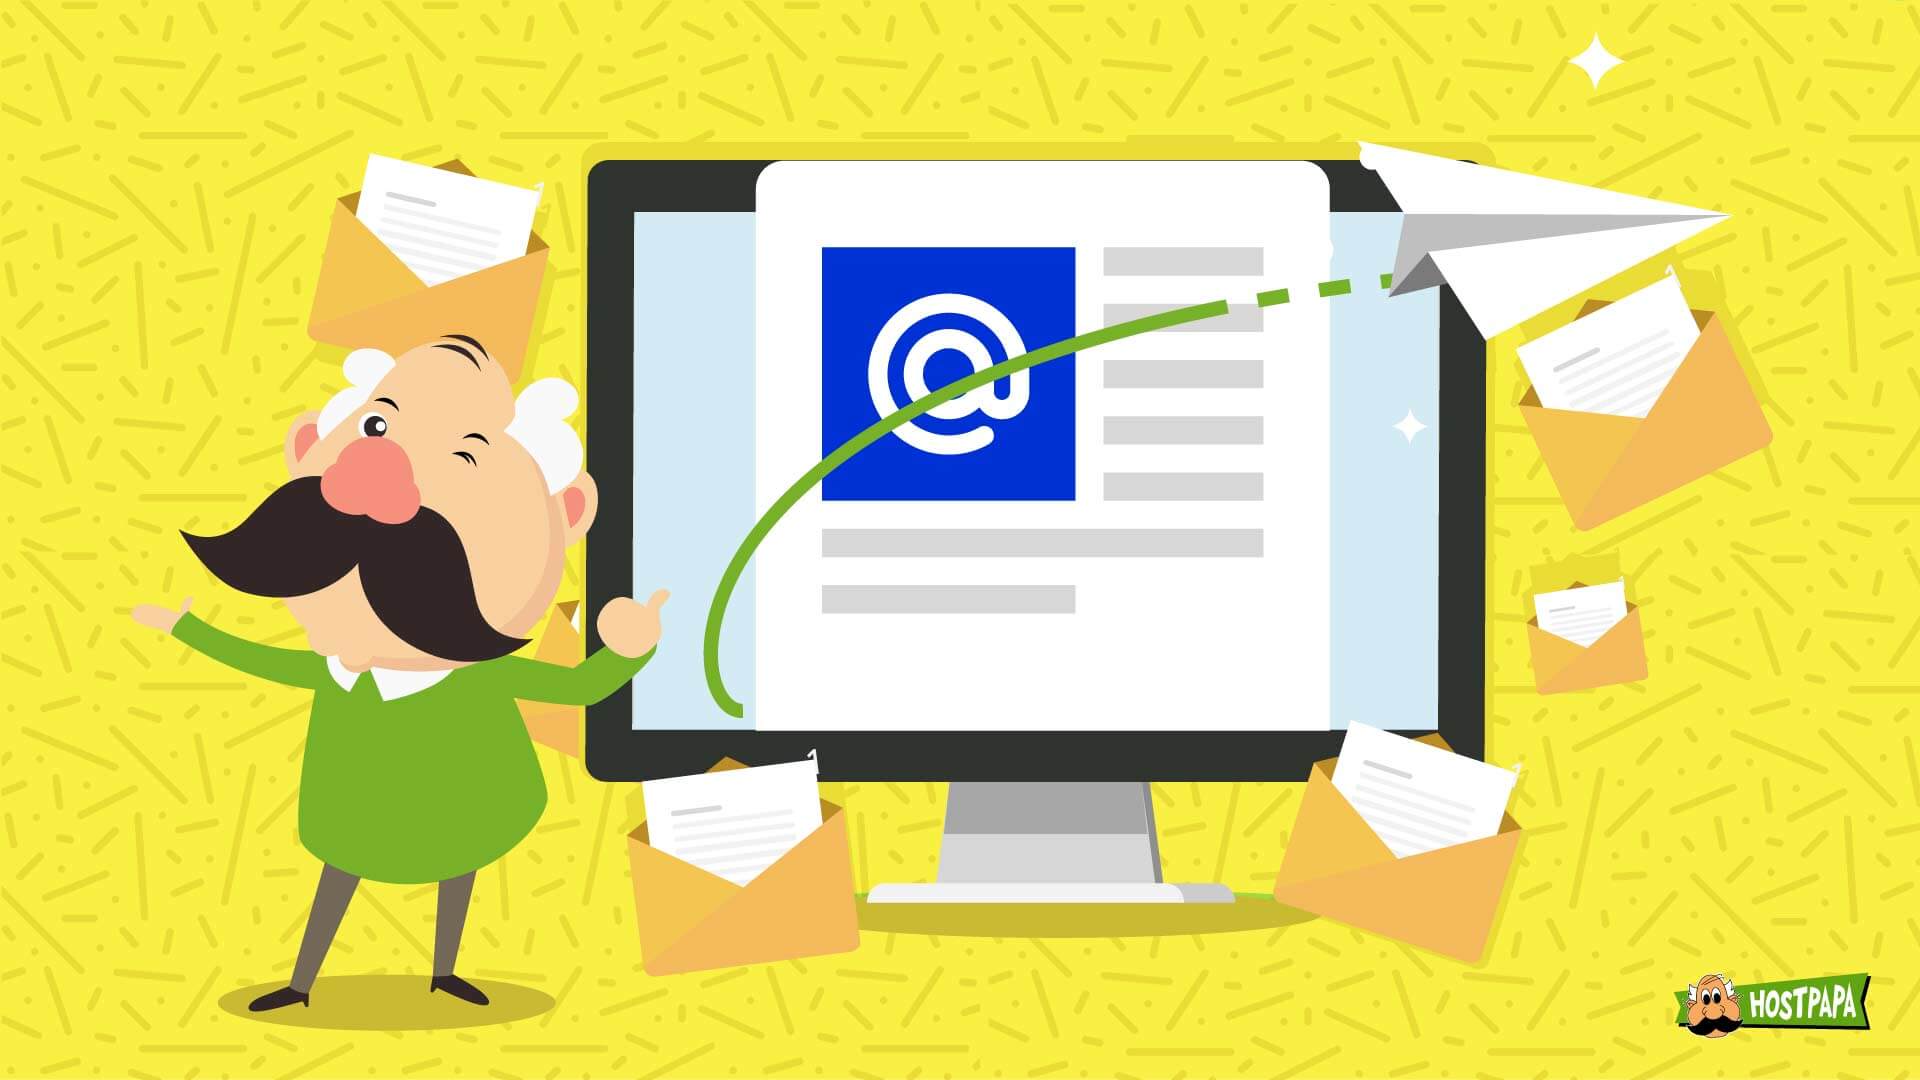 6 Tips to Optimize Your Email Marketing Campaigns